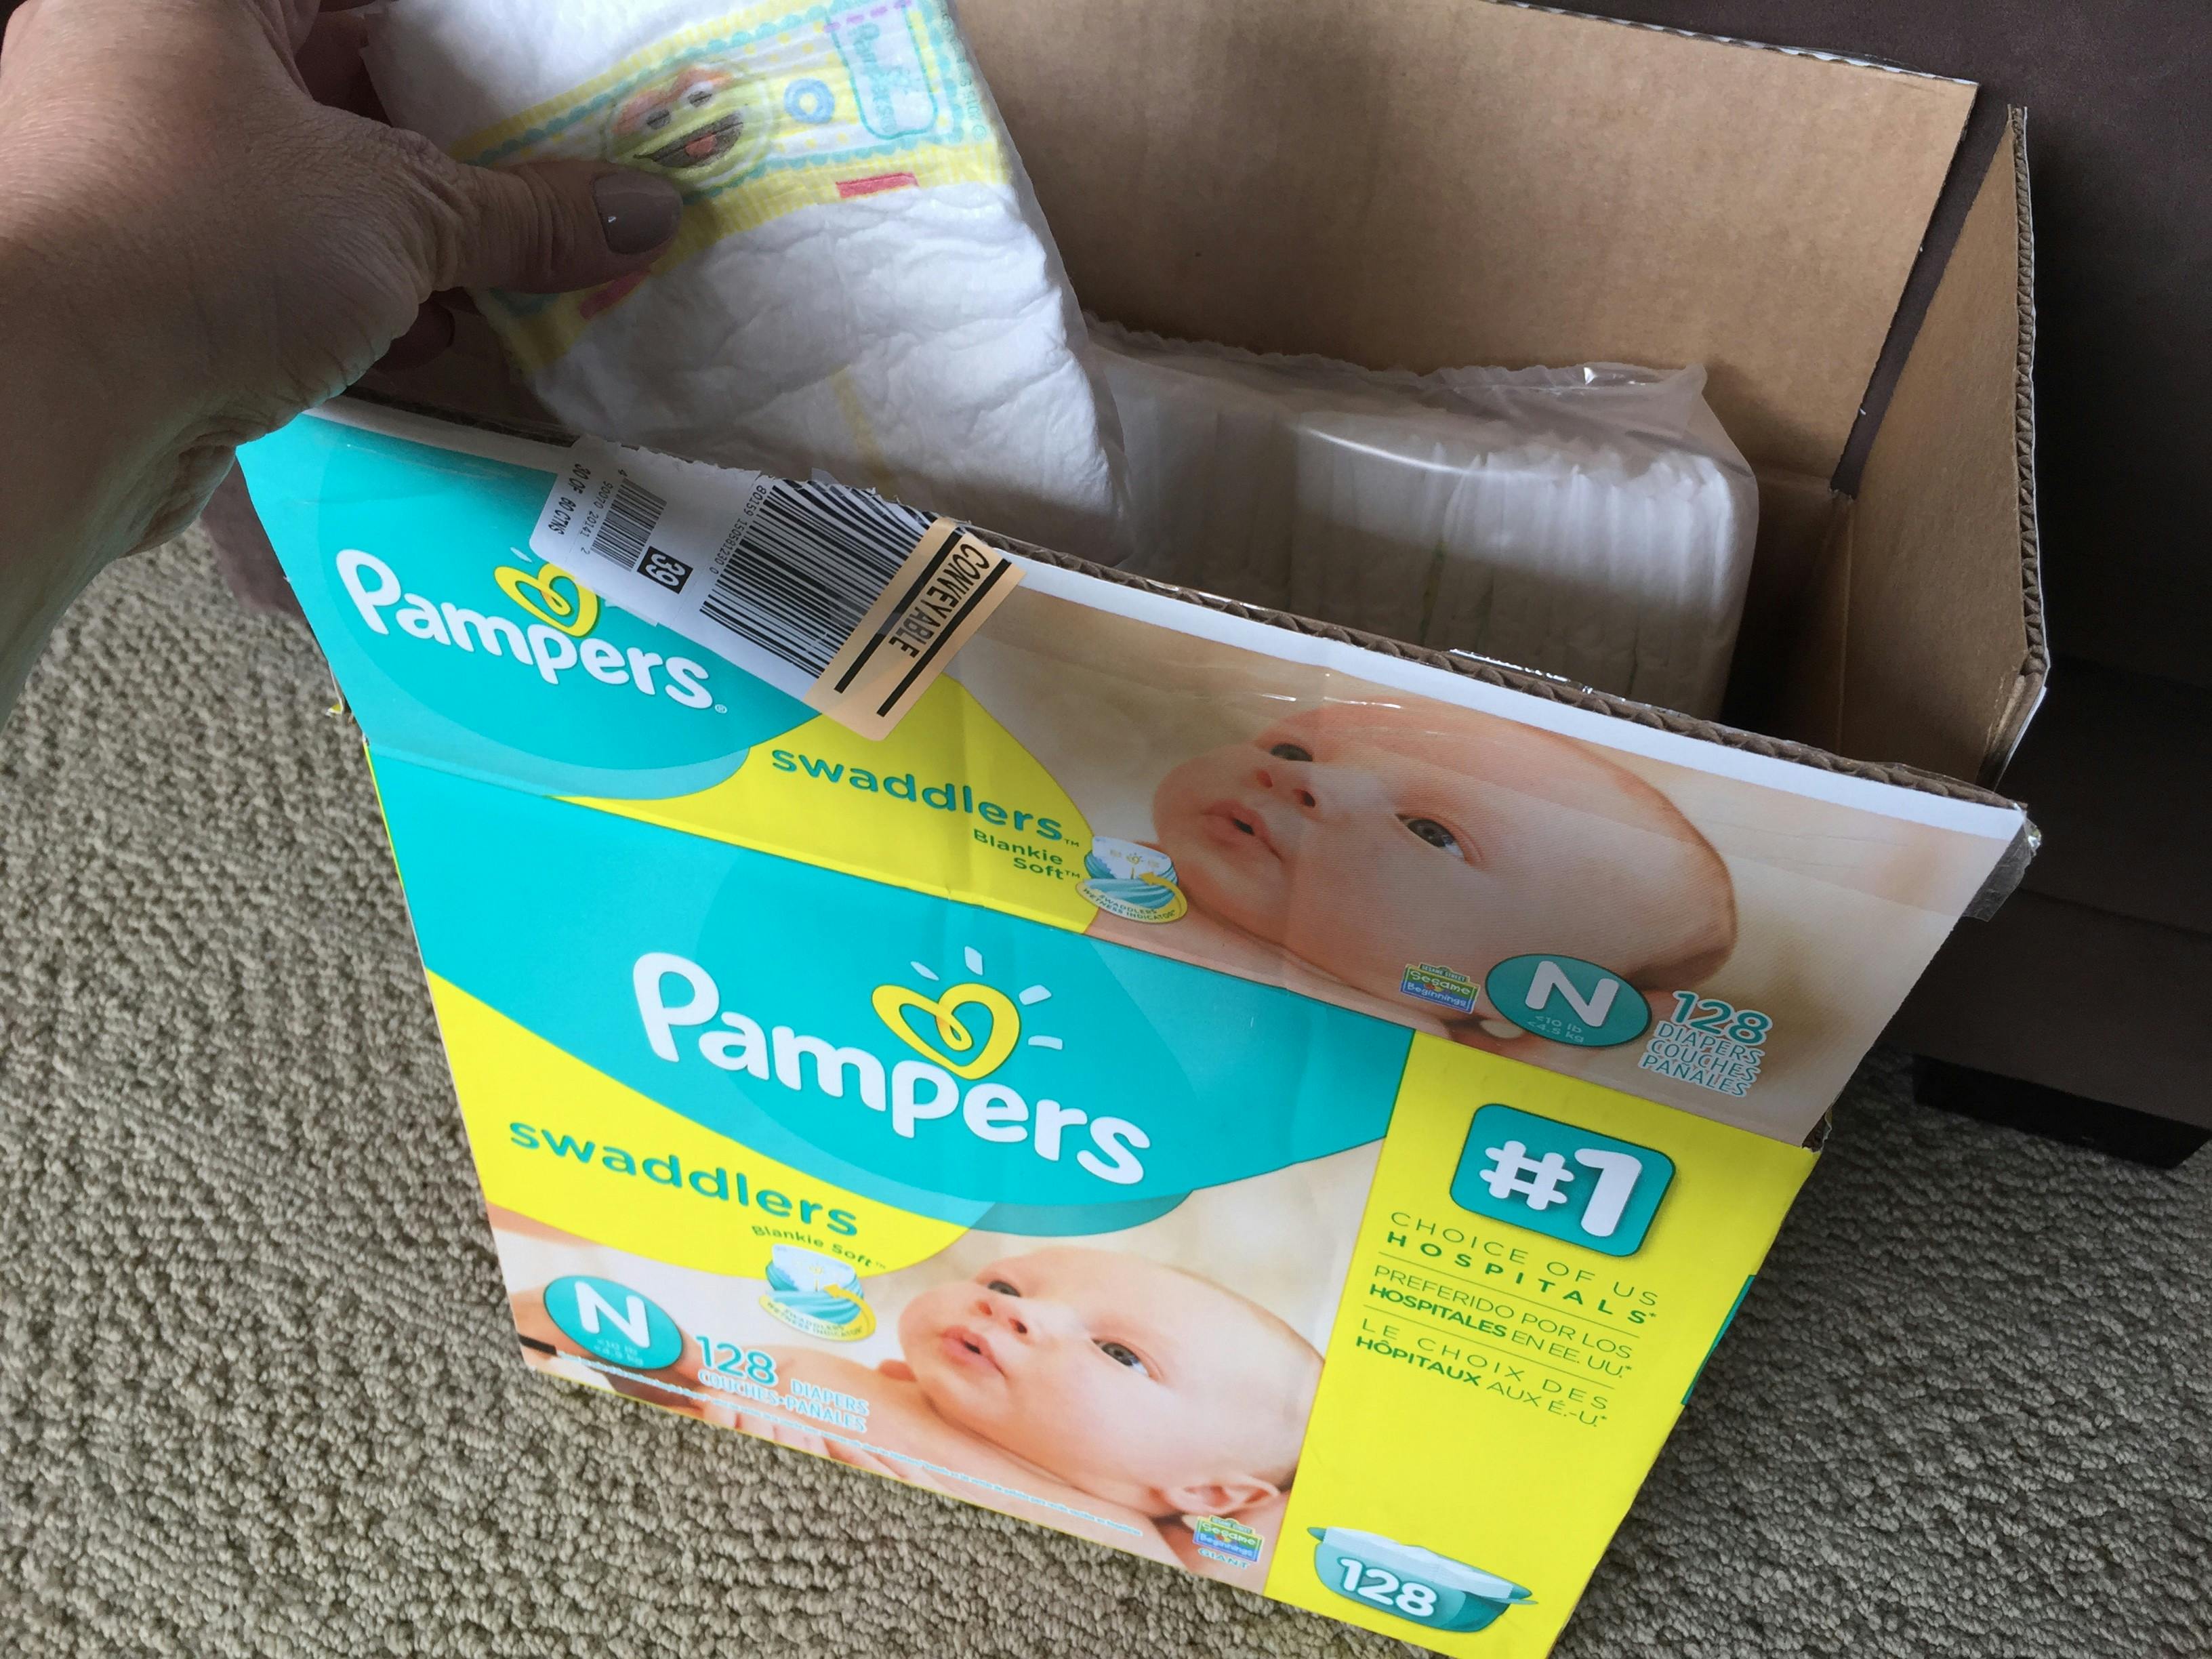 diapers on sale this week near me